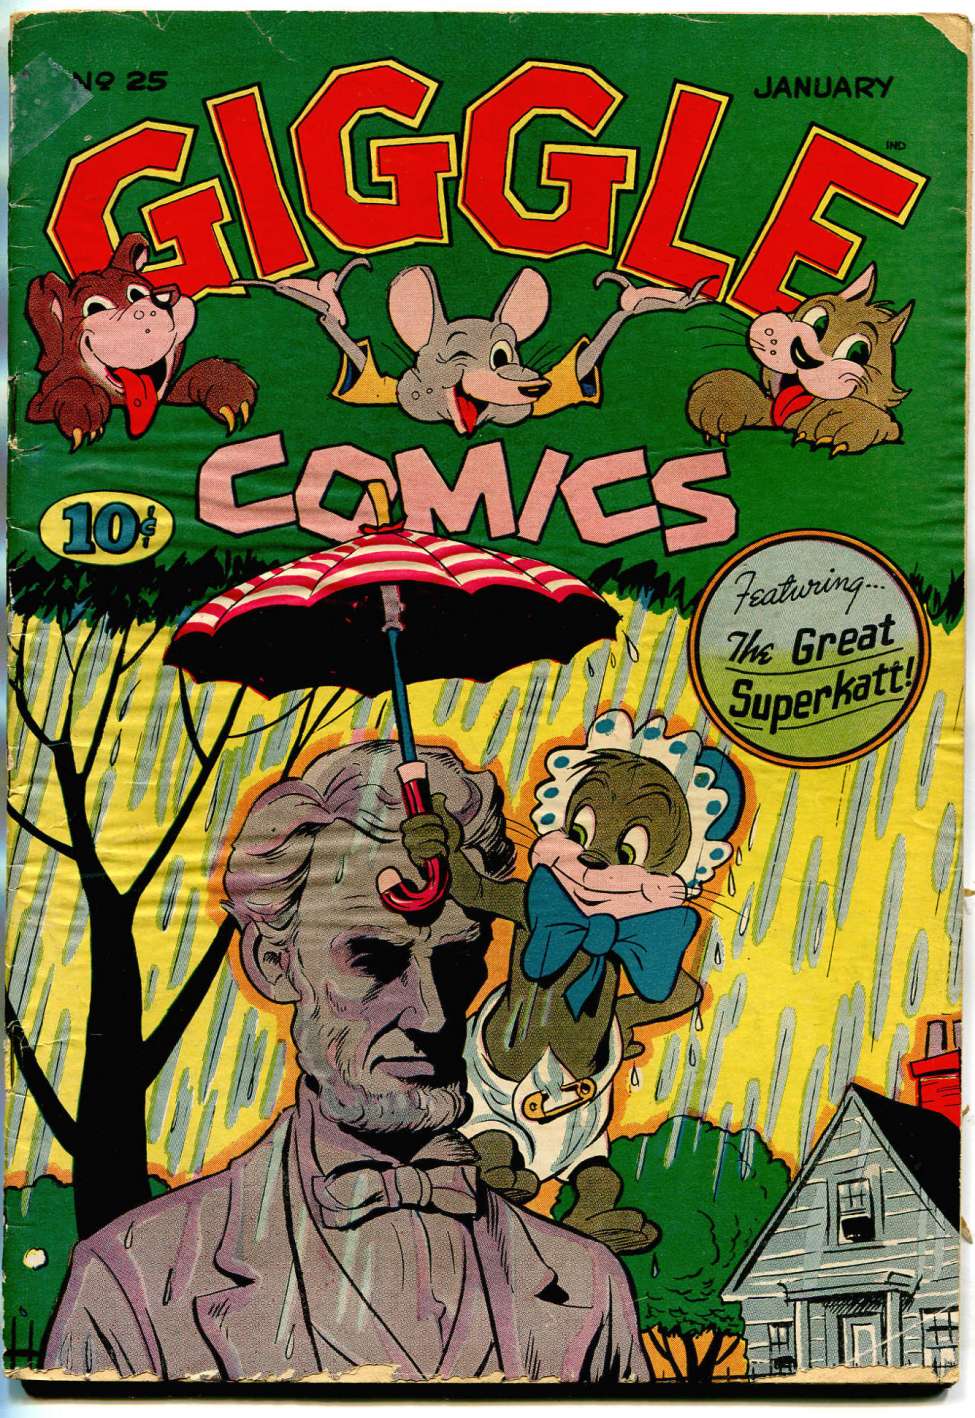 Book Cover For Giggle Comics 25